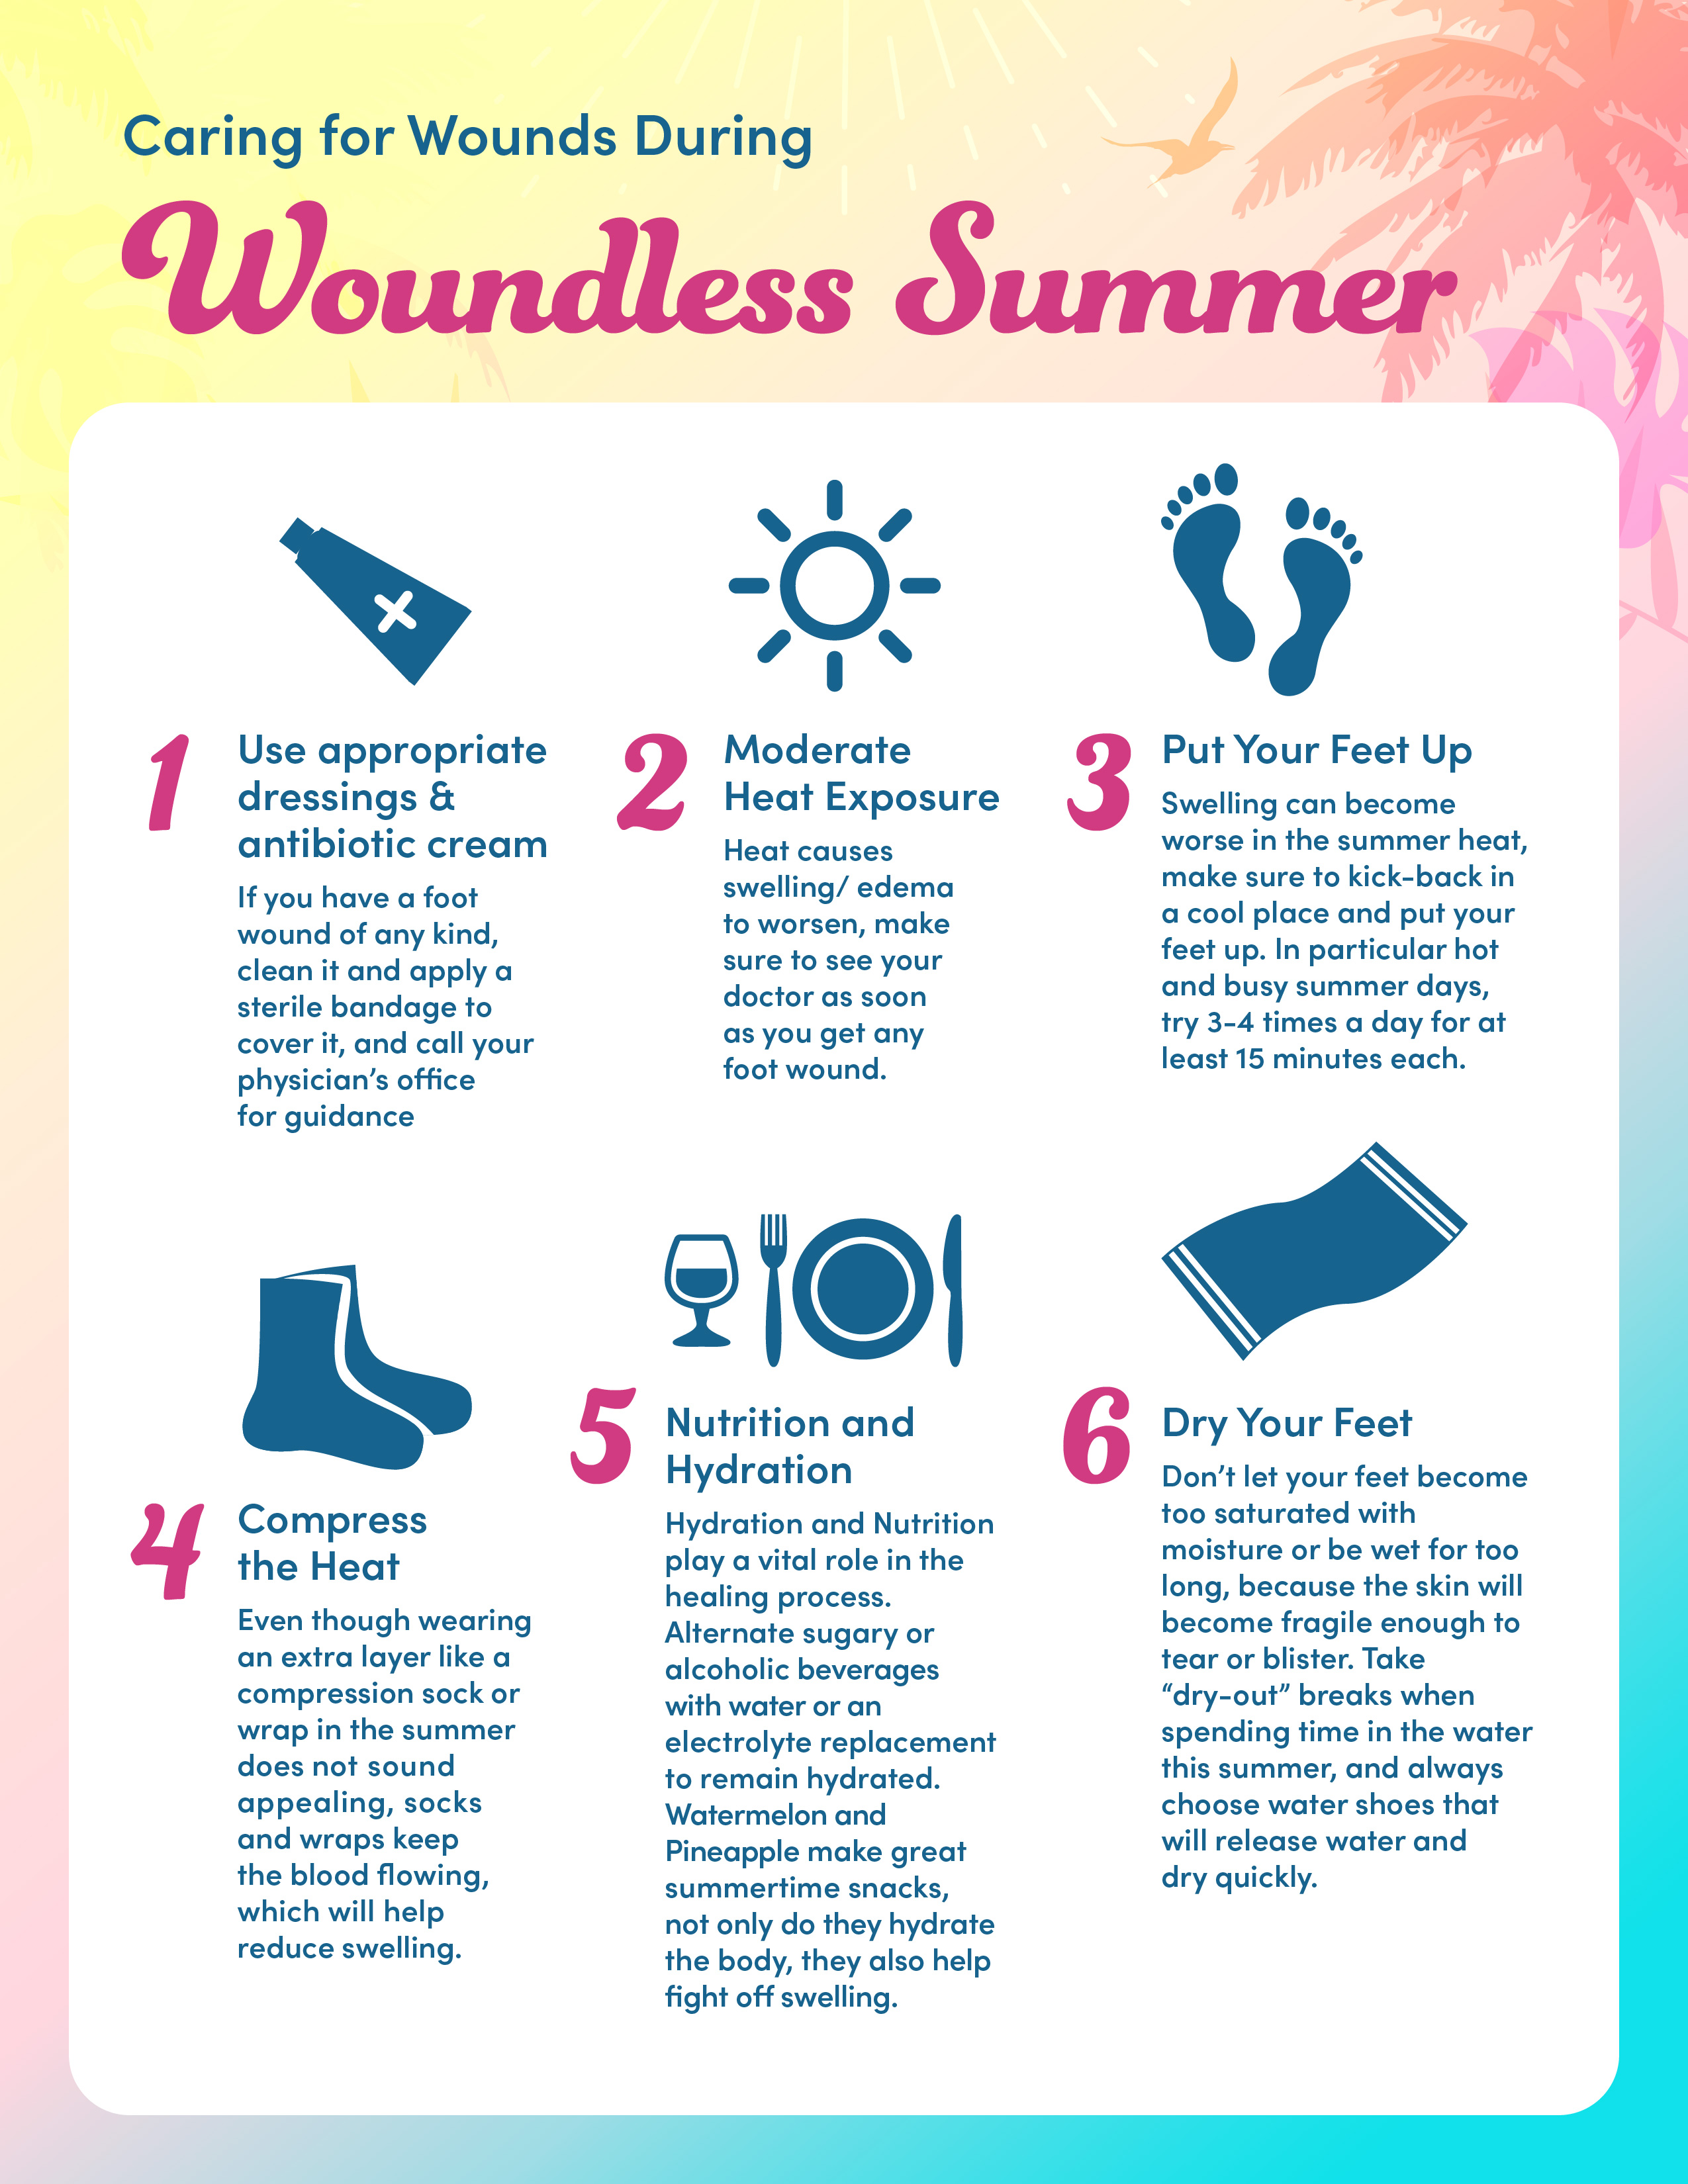 6 tips for a woundless summer